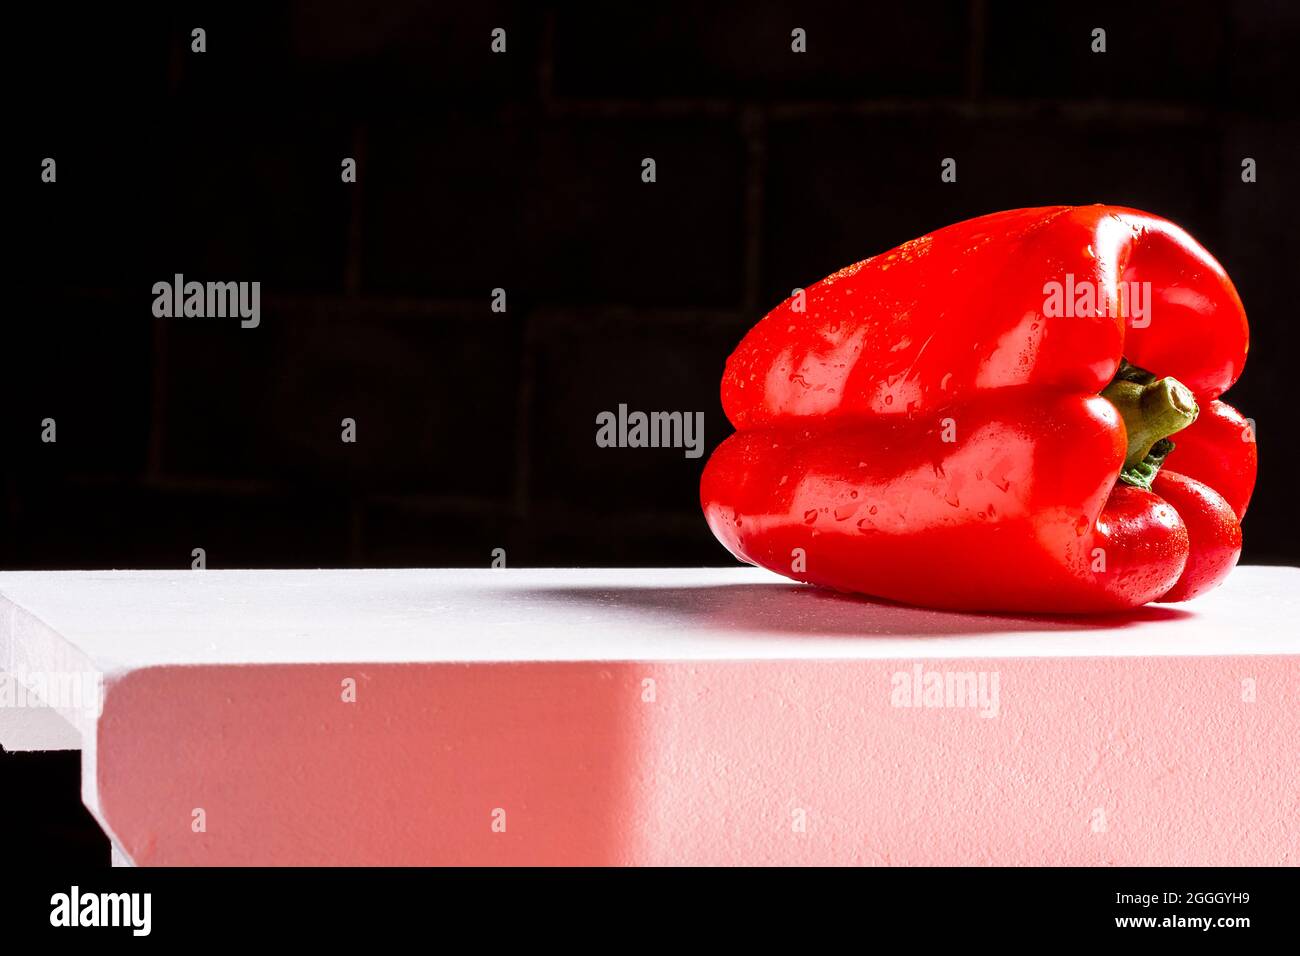 Photograph of a red pepper that is wet and lying on a white bench and a black background.The photo is taken in horizontal format and has space to put Stock Photo